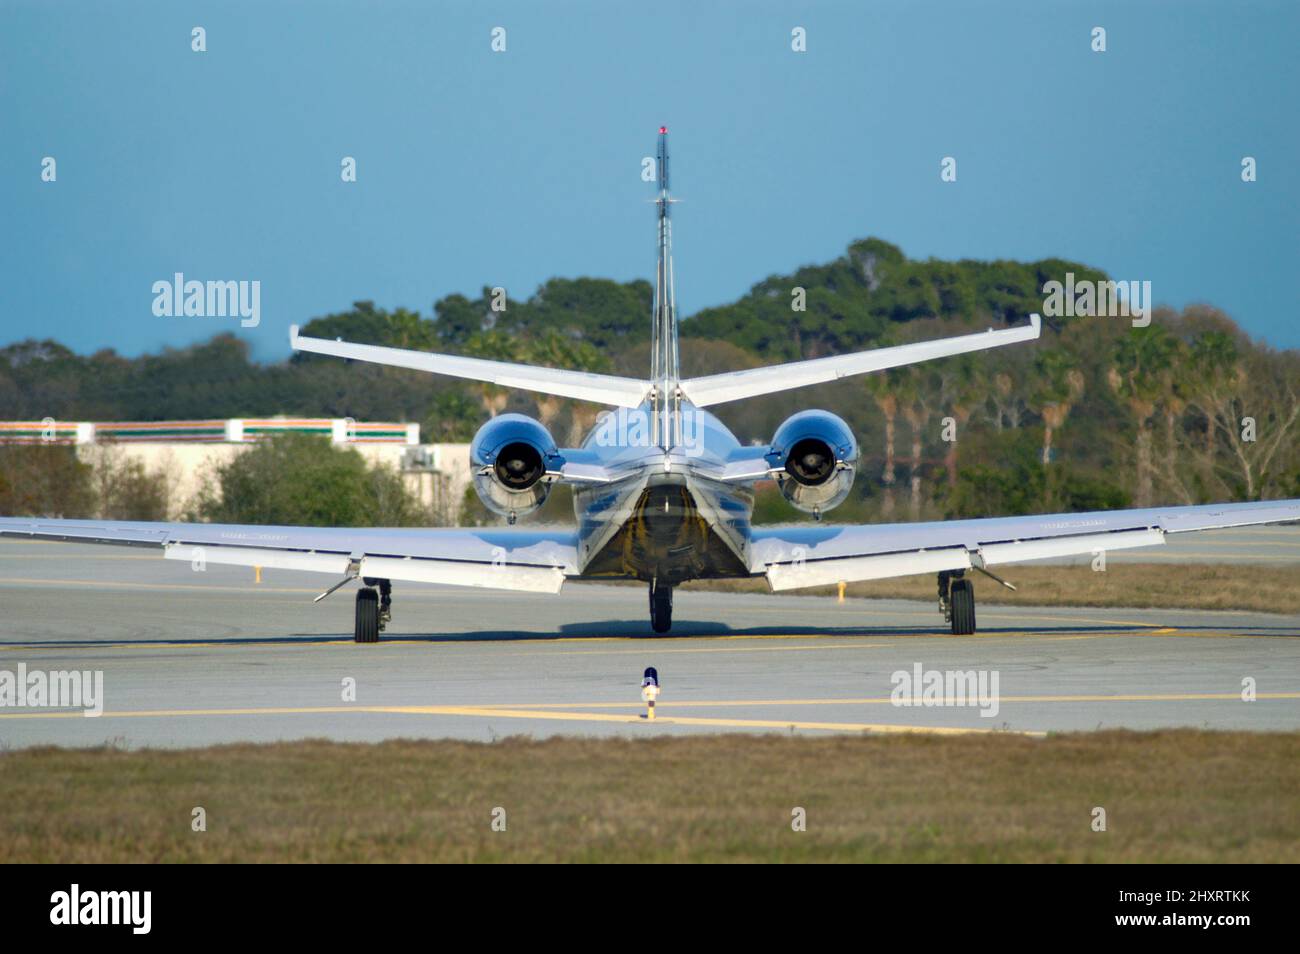 Cessna Citation about to take off Stock Photo